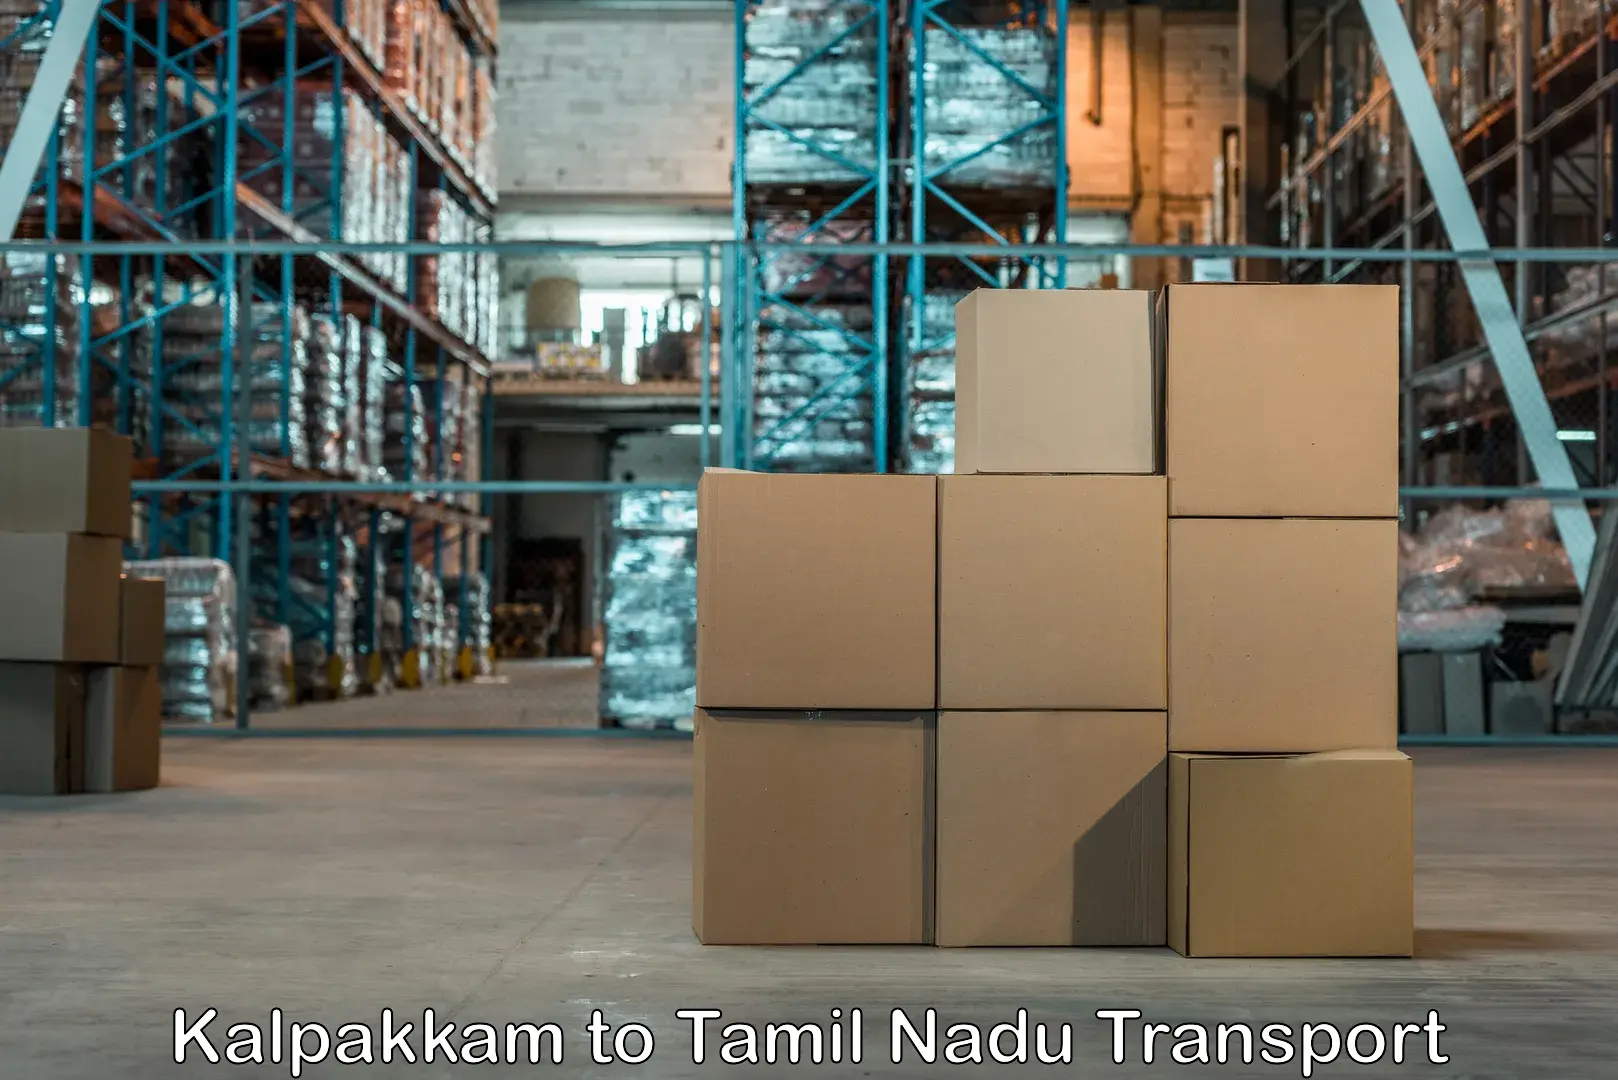 Commercial transport service Kalpakkam to Meenakshi Academy of Higher Education and Research Chennai